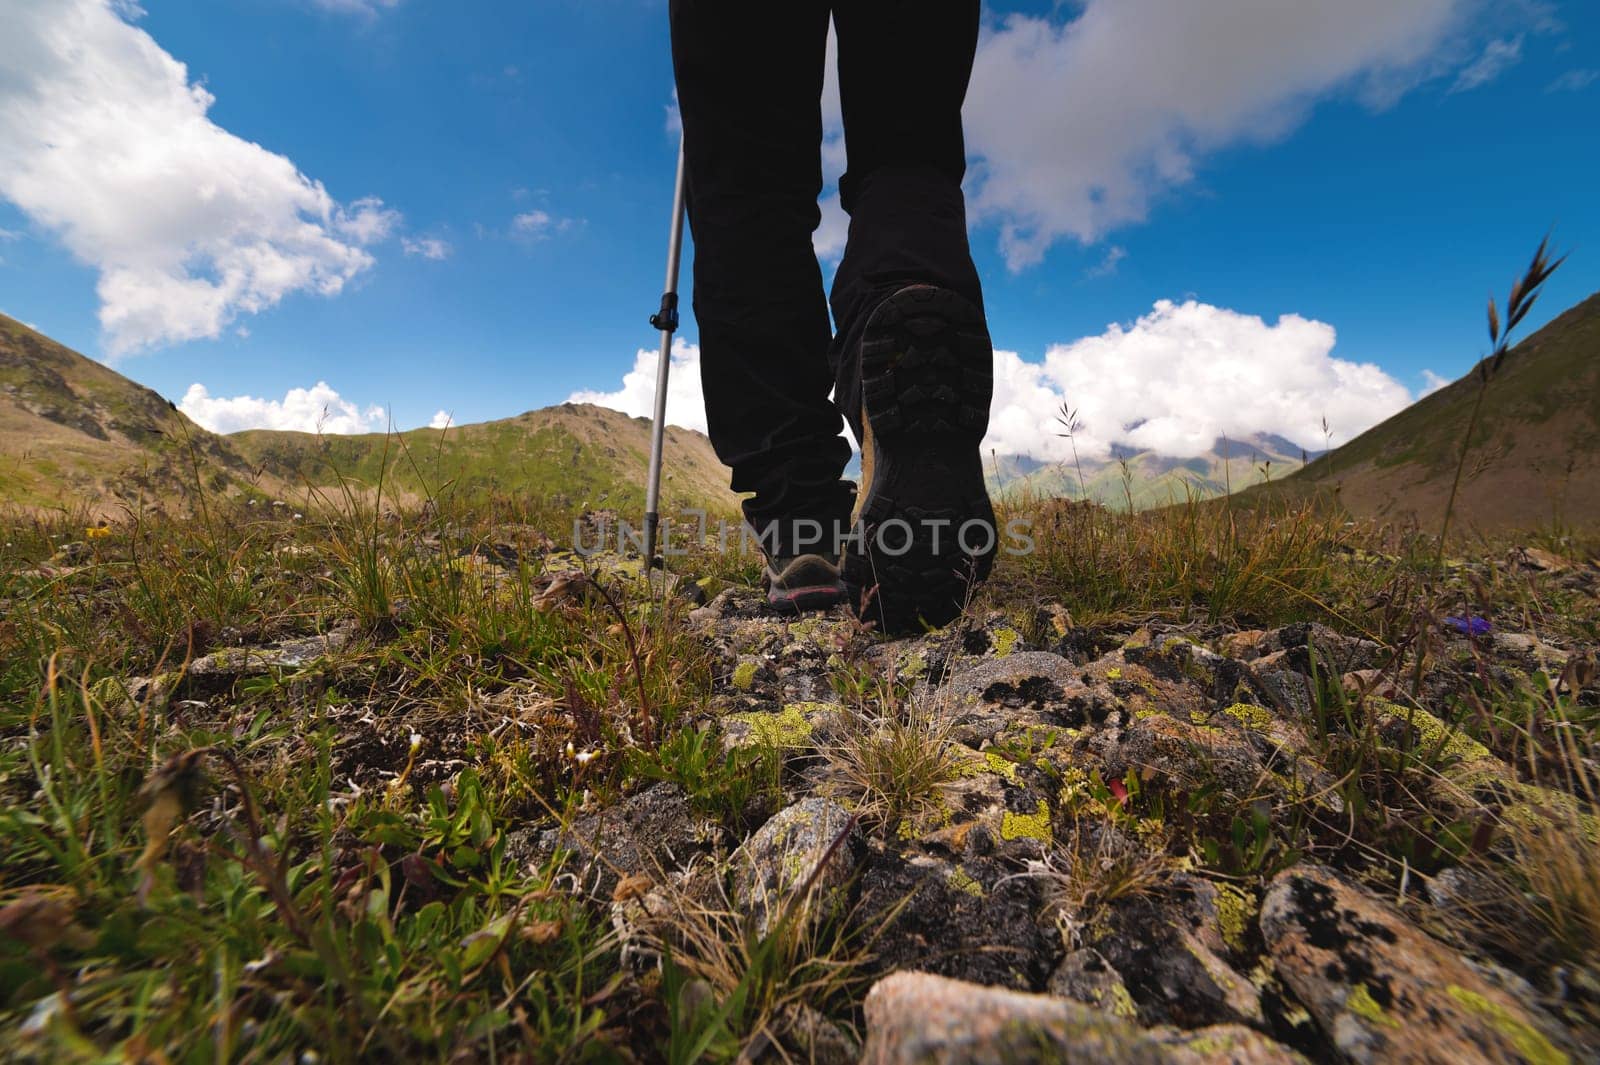 Hiking trail with flowers, green grass and stones. Close up of hiking boots in the mountains against the backdrop of mountains and fluffy clouds by yanik88